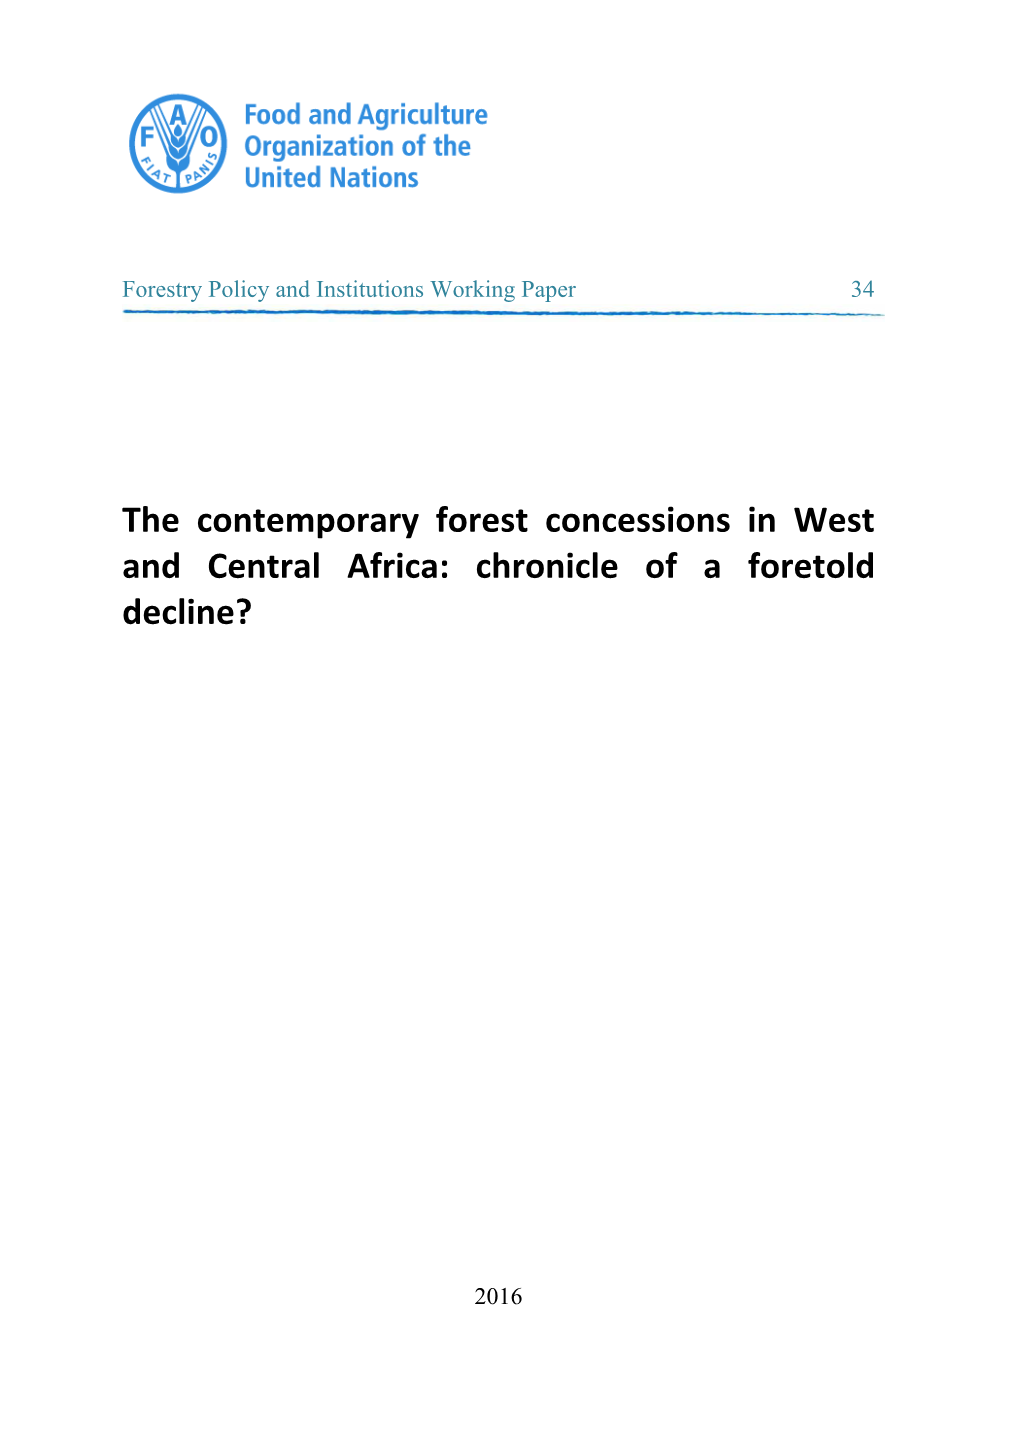 The Contemporary Forest Concessions in West and Central Africa: Chronicle of a Foretold Decline?